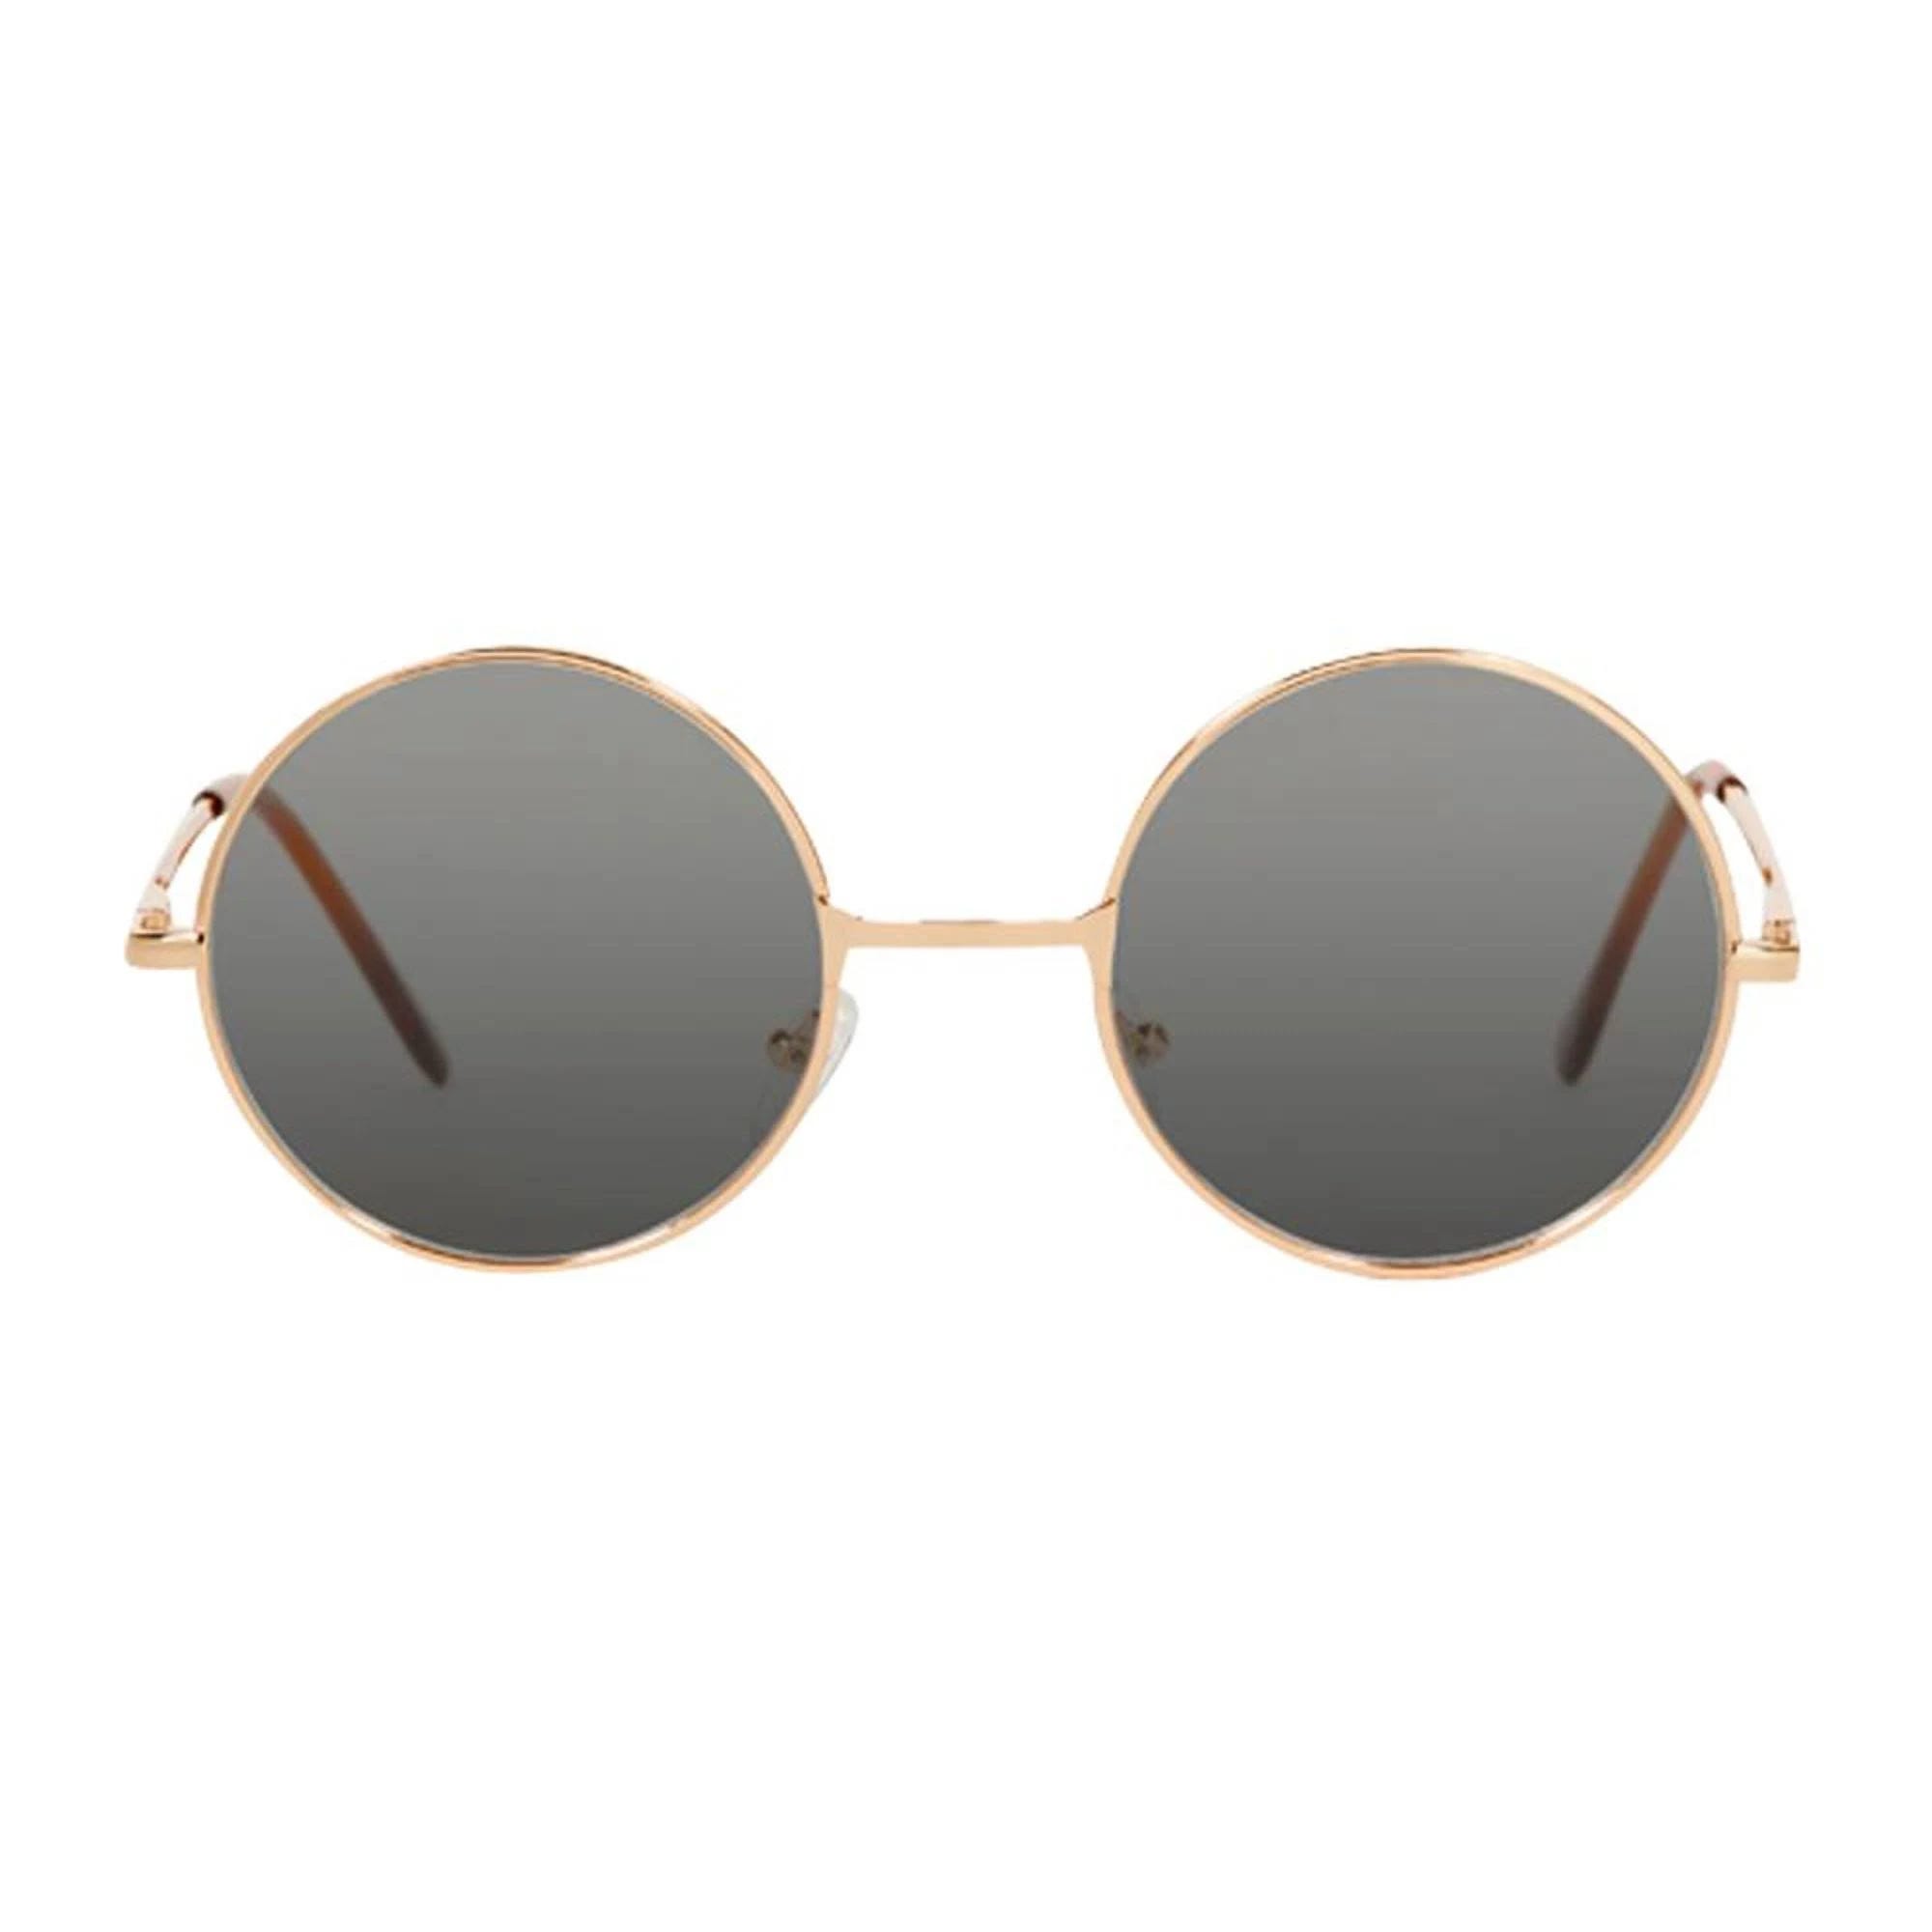 Gold Framed Black Lens Sunglasses with UV Protection and Microfiber Pouch | Image